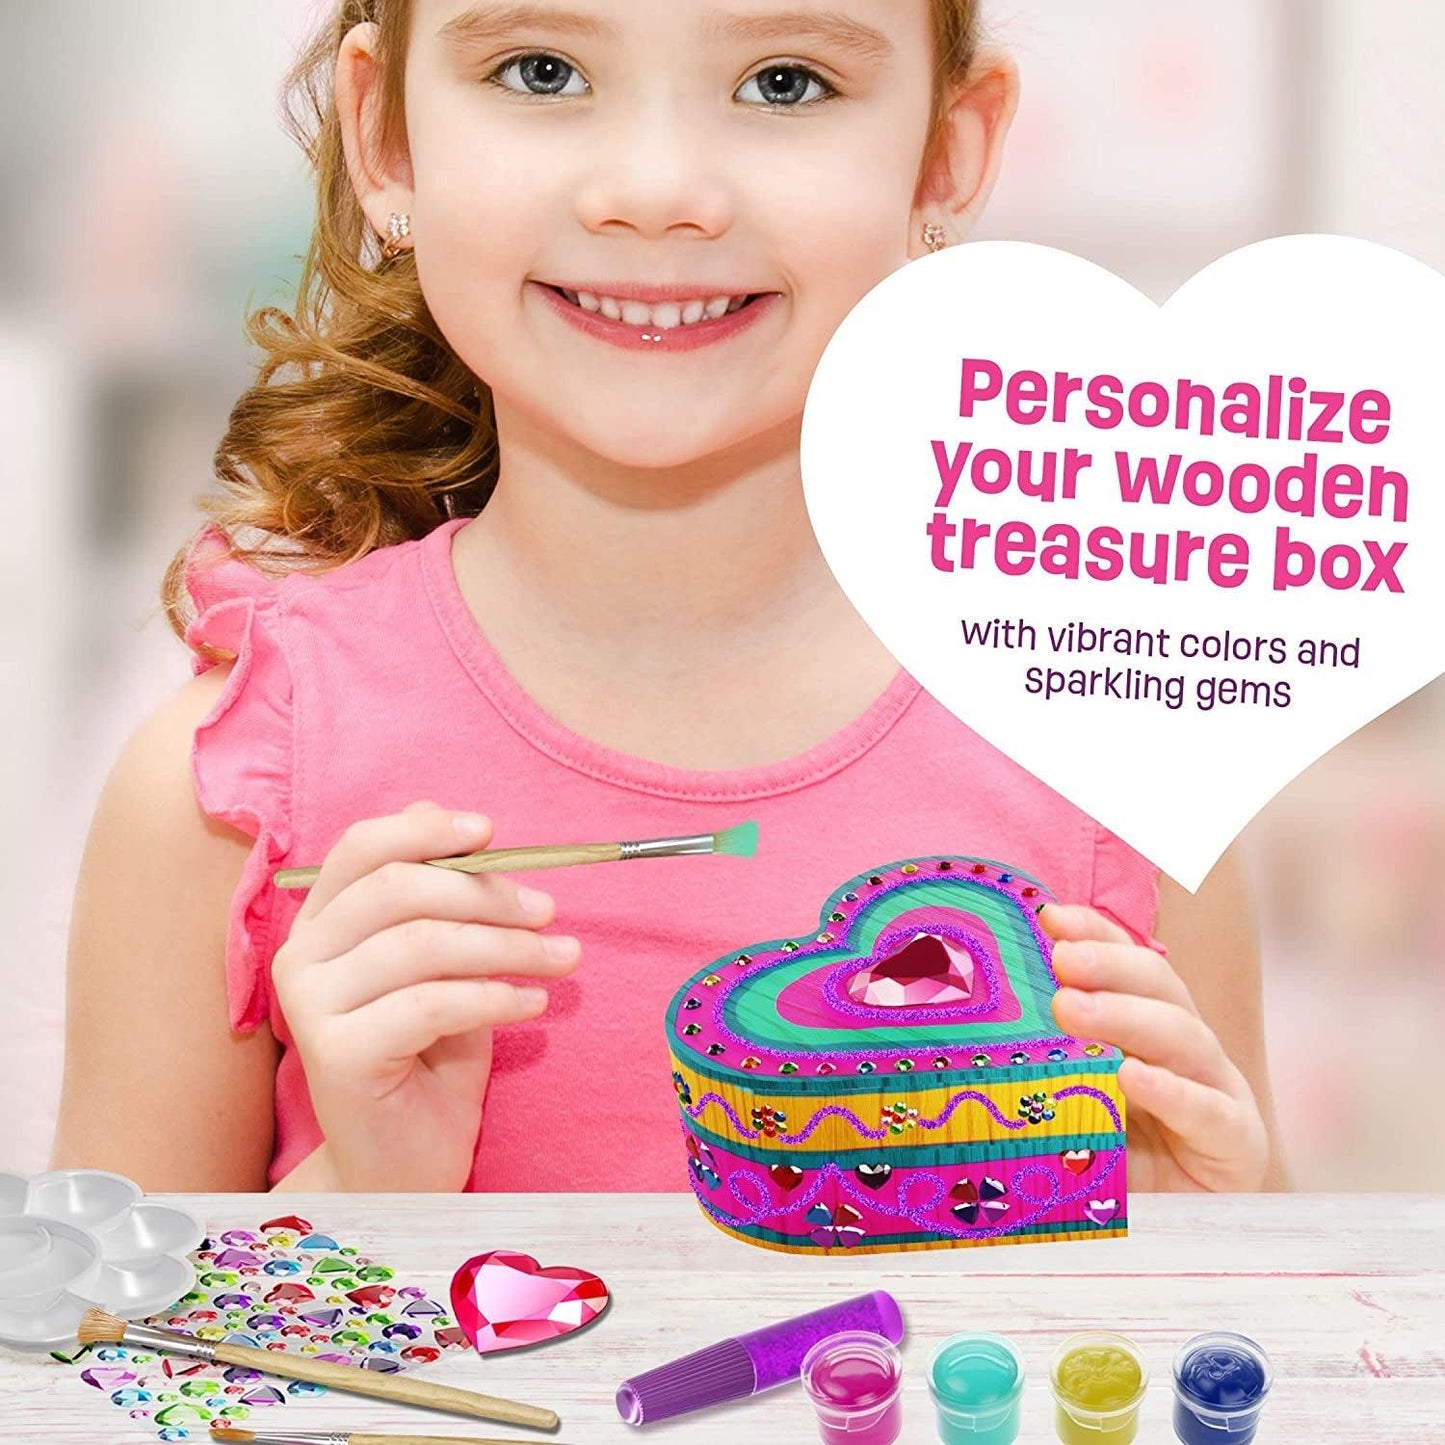 Paint Your Own Wooden Kids Heart Treasure Box Kit - Art Kits for Toddler Girl - Arts and Craft - WoodArtSupply